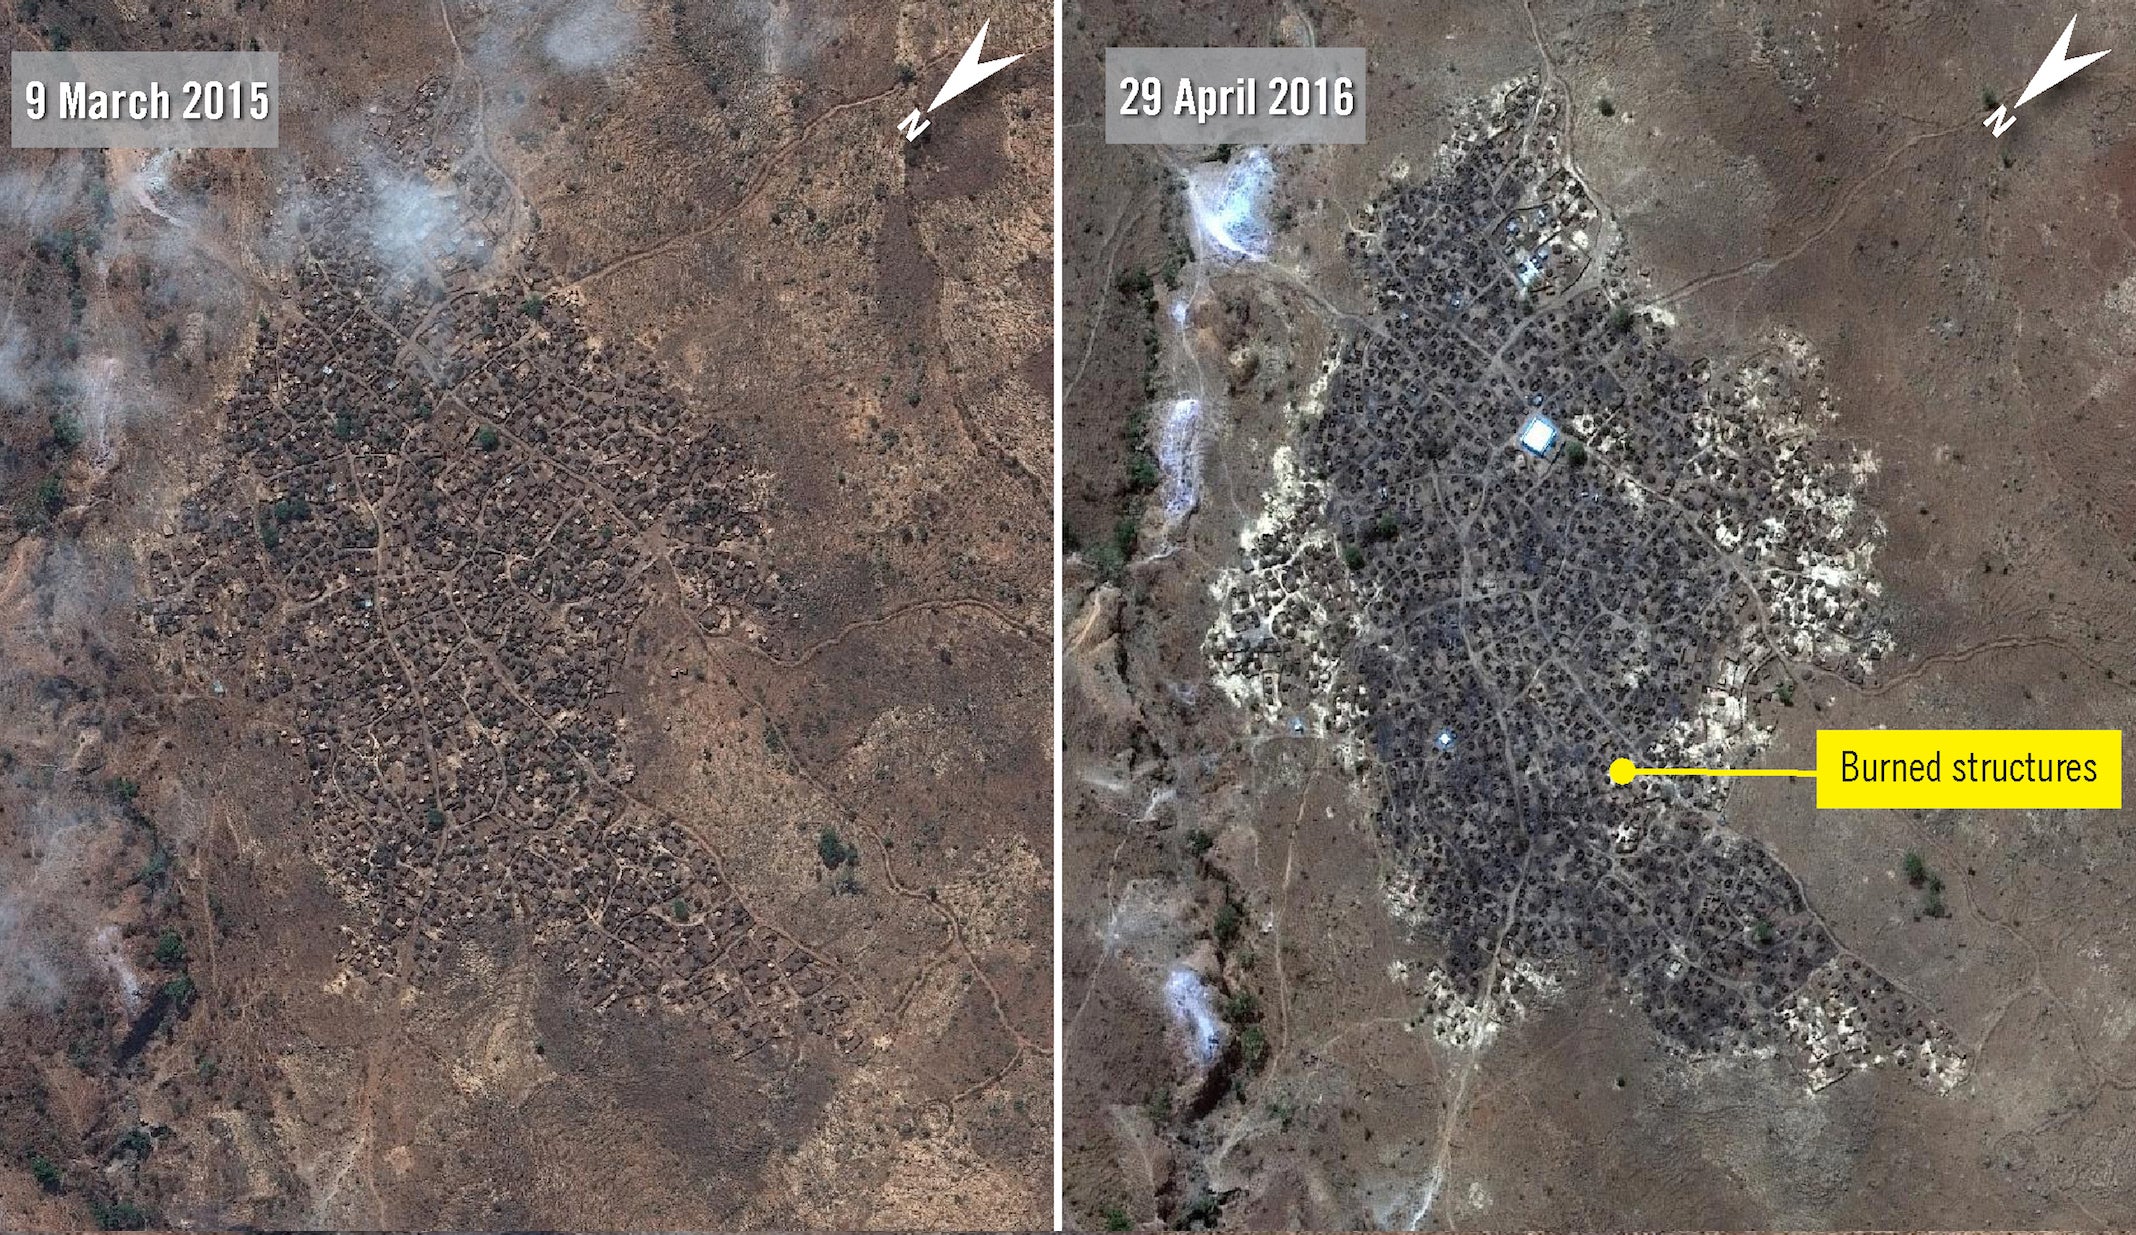 &#13;
Satellite imagery from March 2015 (L) and April 2016 shows the village of Karmal has been almost completely razed by fire. Only a few thatched roof tukuls, on the outer edges of the village (R), appear undamaged &#13;